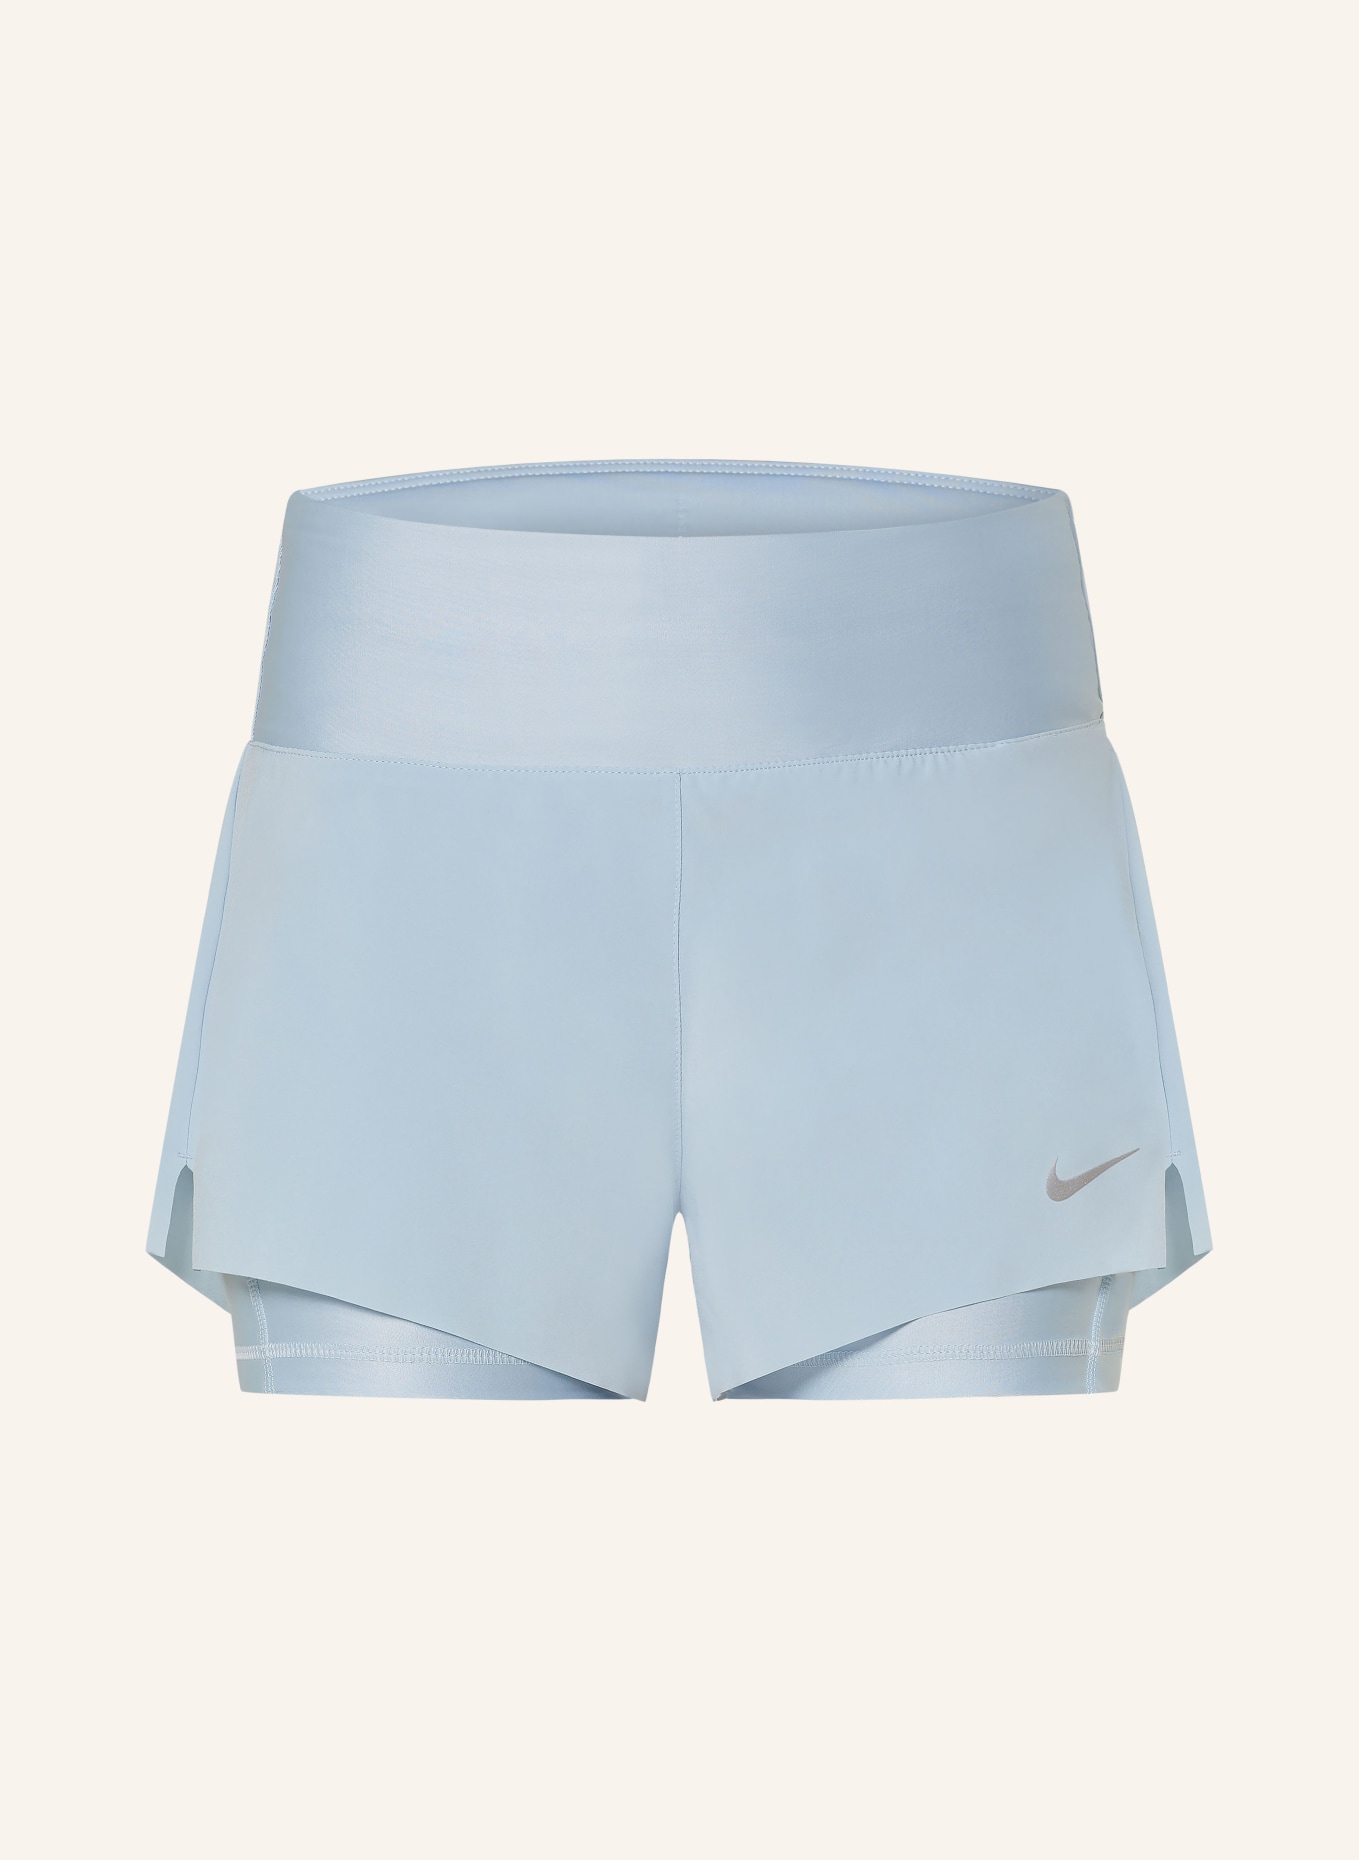 Nike 2-in-1 running shorts DRI-FIT SWIFT, Color: LIGHT BLUE (Image 1)